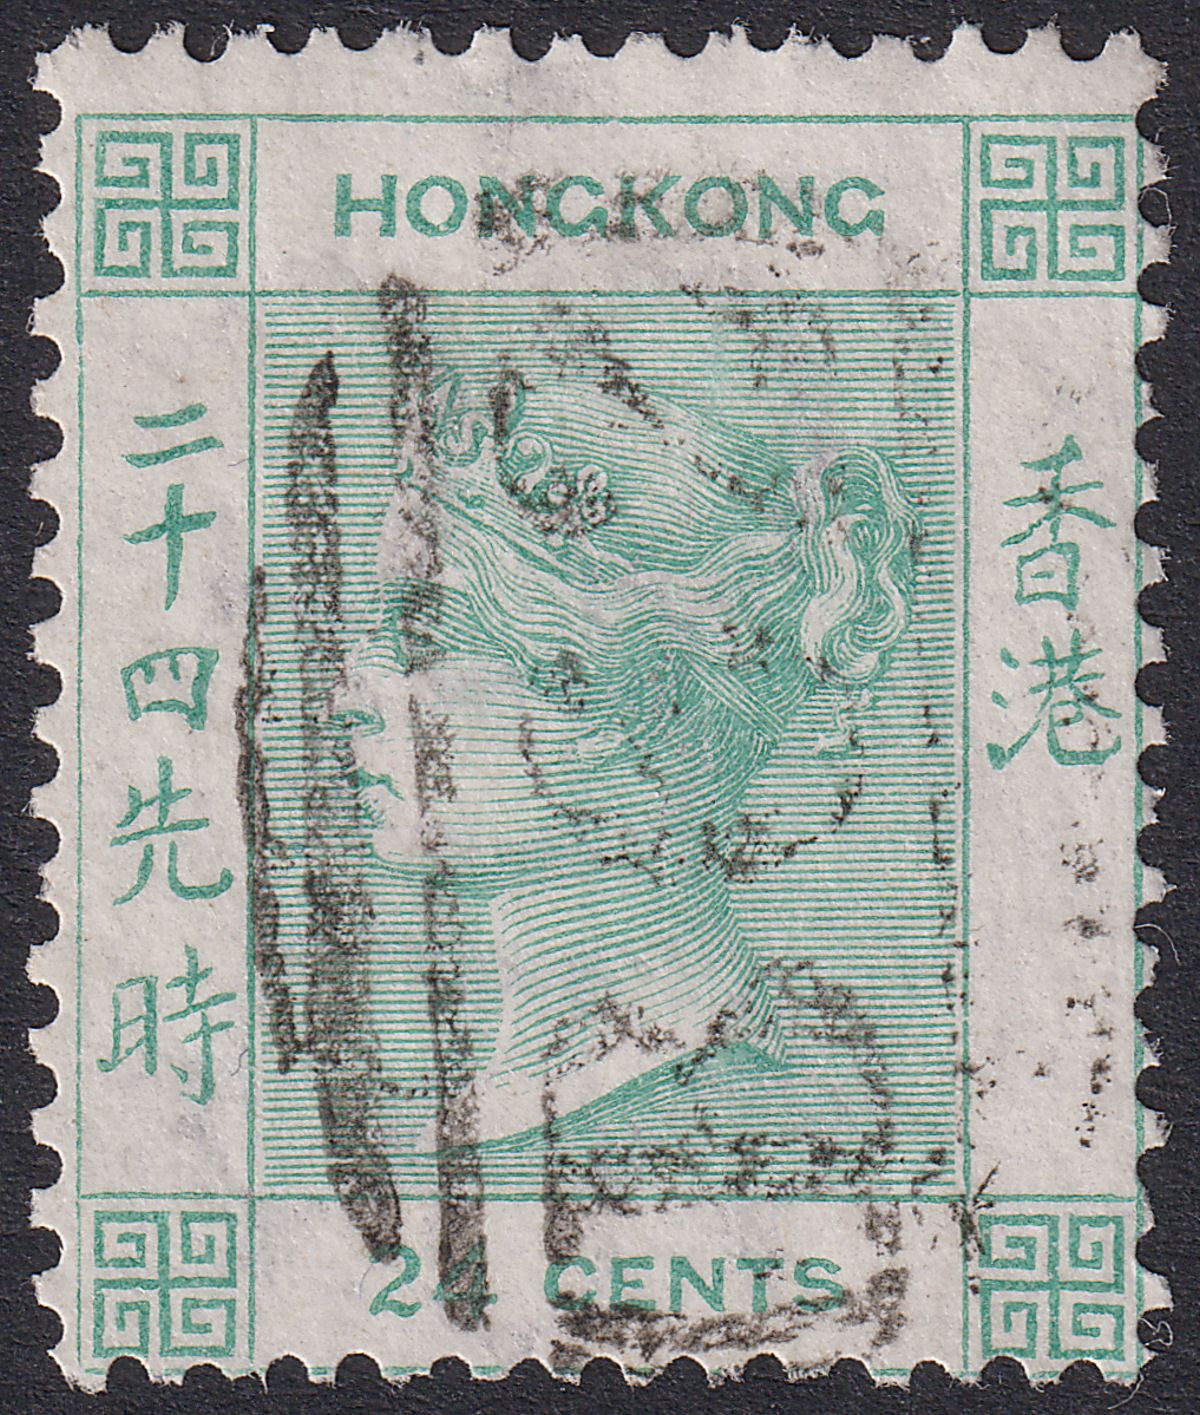 Hong Kong 1864 QV 24c Green wmk Inverted Used SG14w cat £180